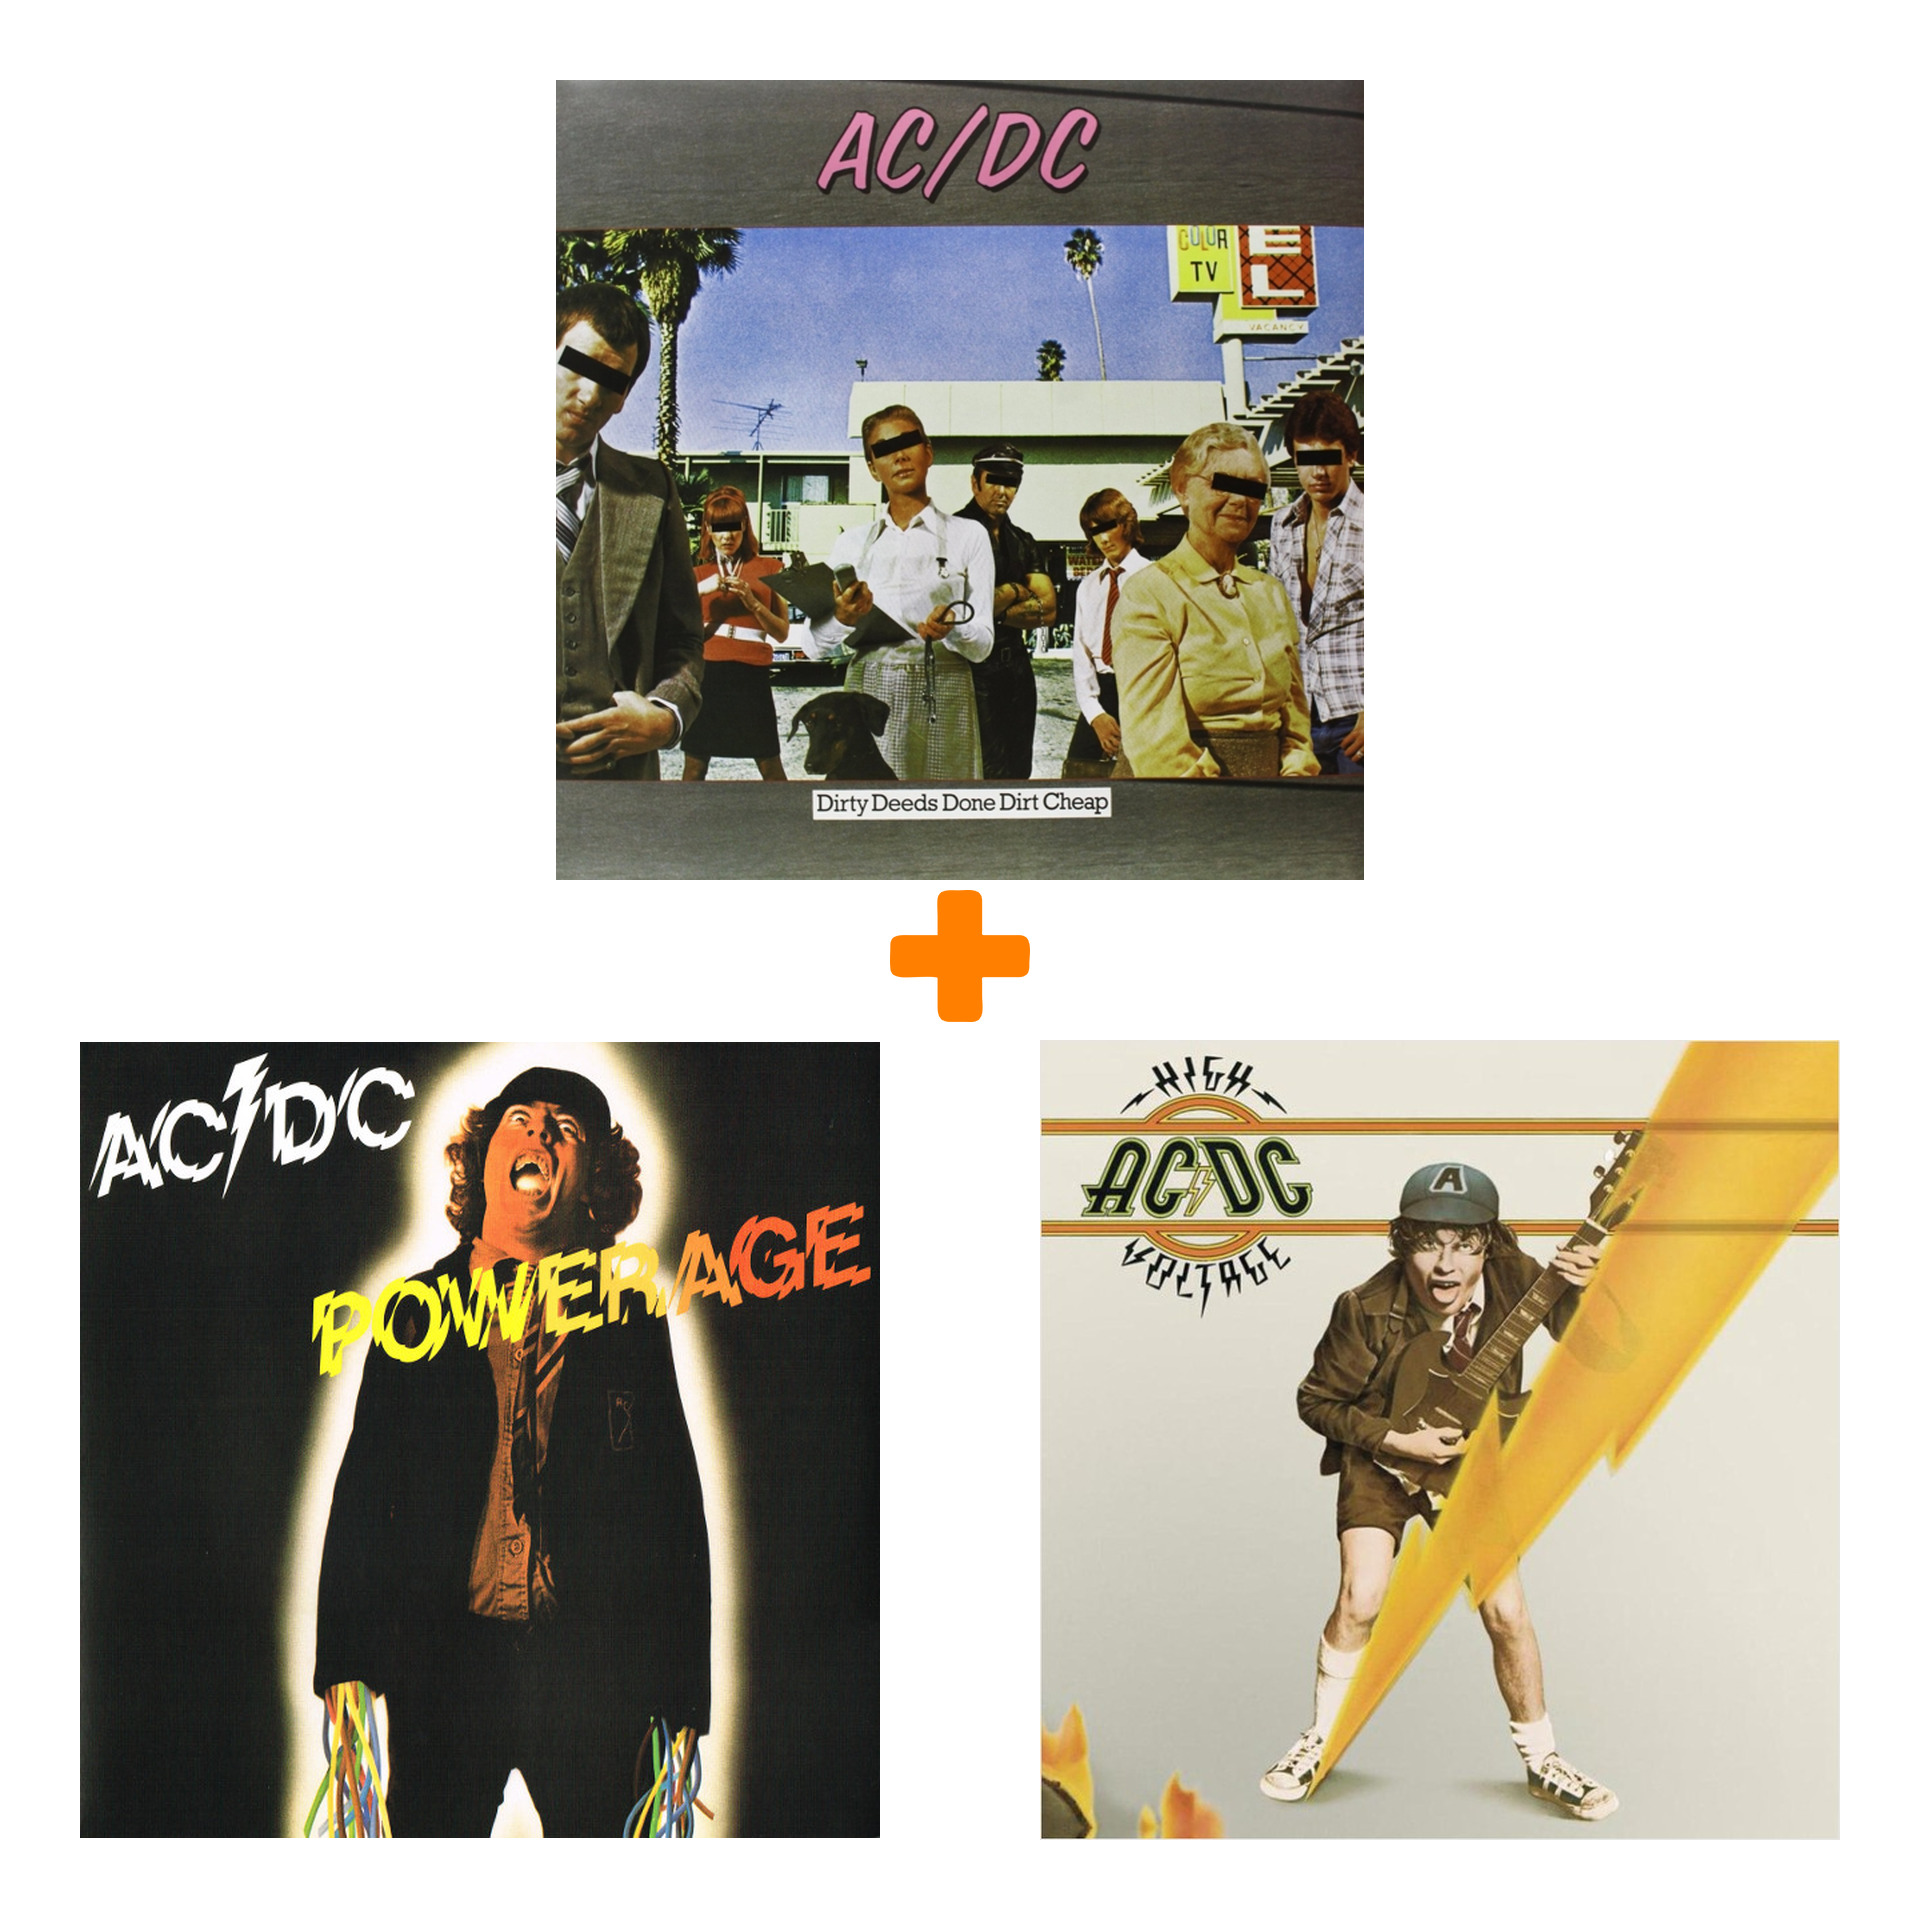 AC/DC – Powerage. Limited Edition (LP) + Dirty Deeds Done Dirt Cheap Limited Edition (LP) + High Voltage (LP)